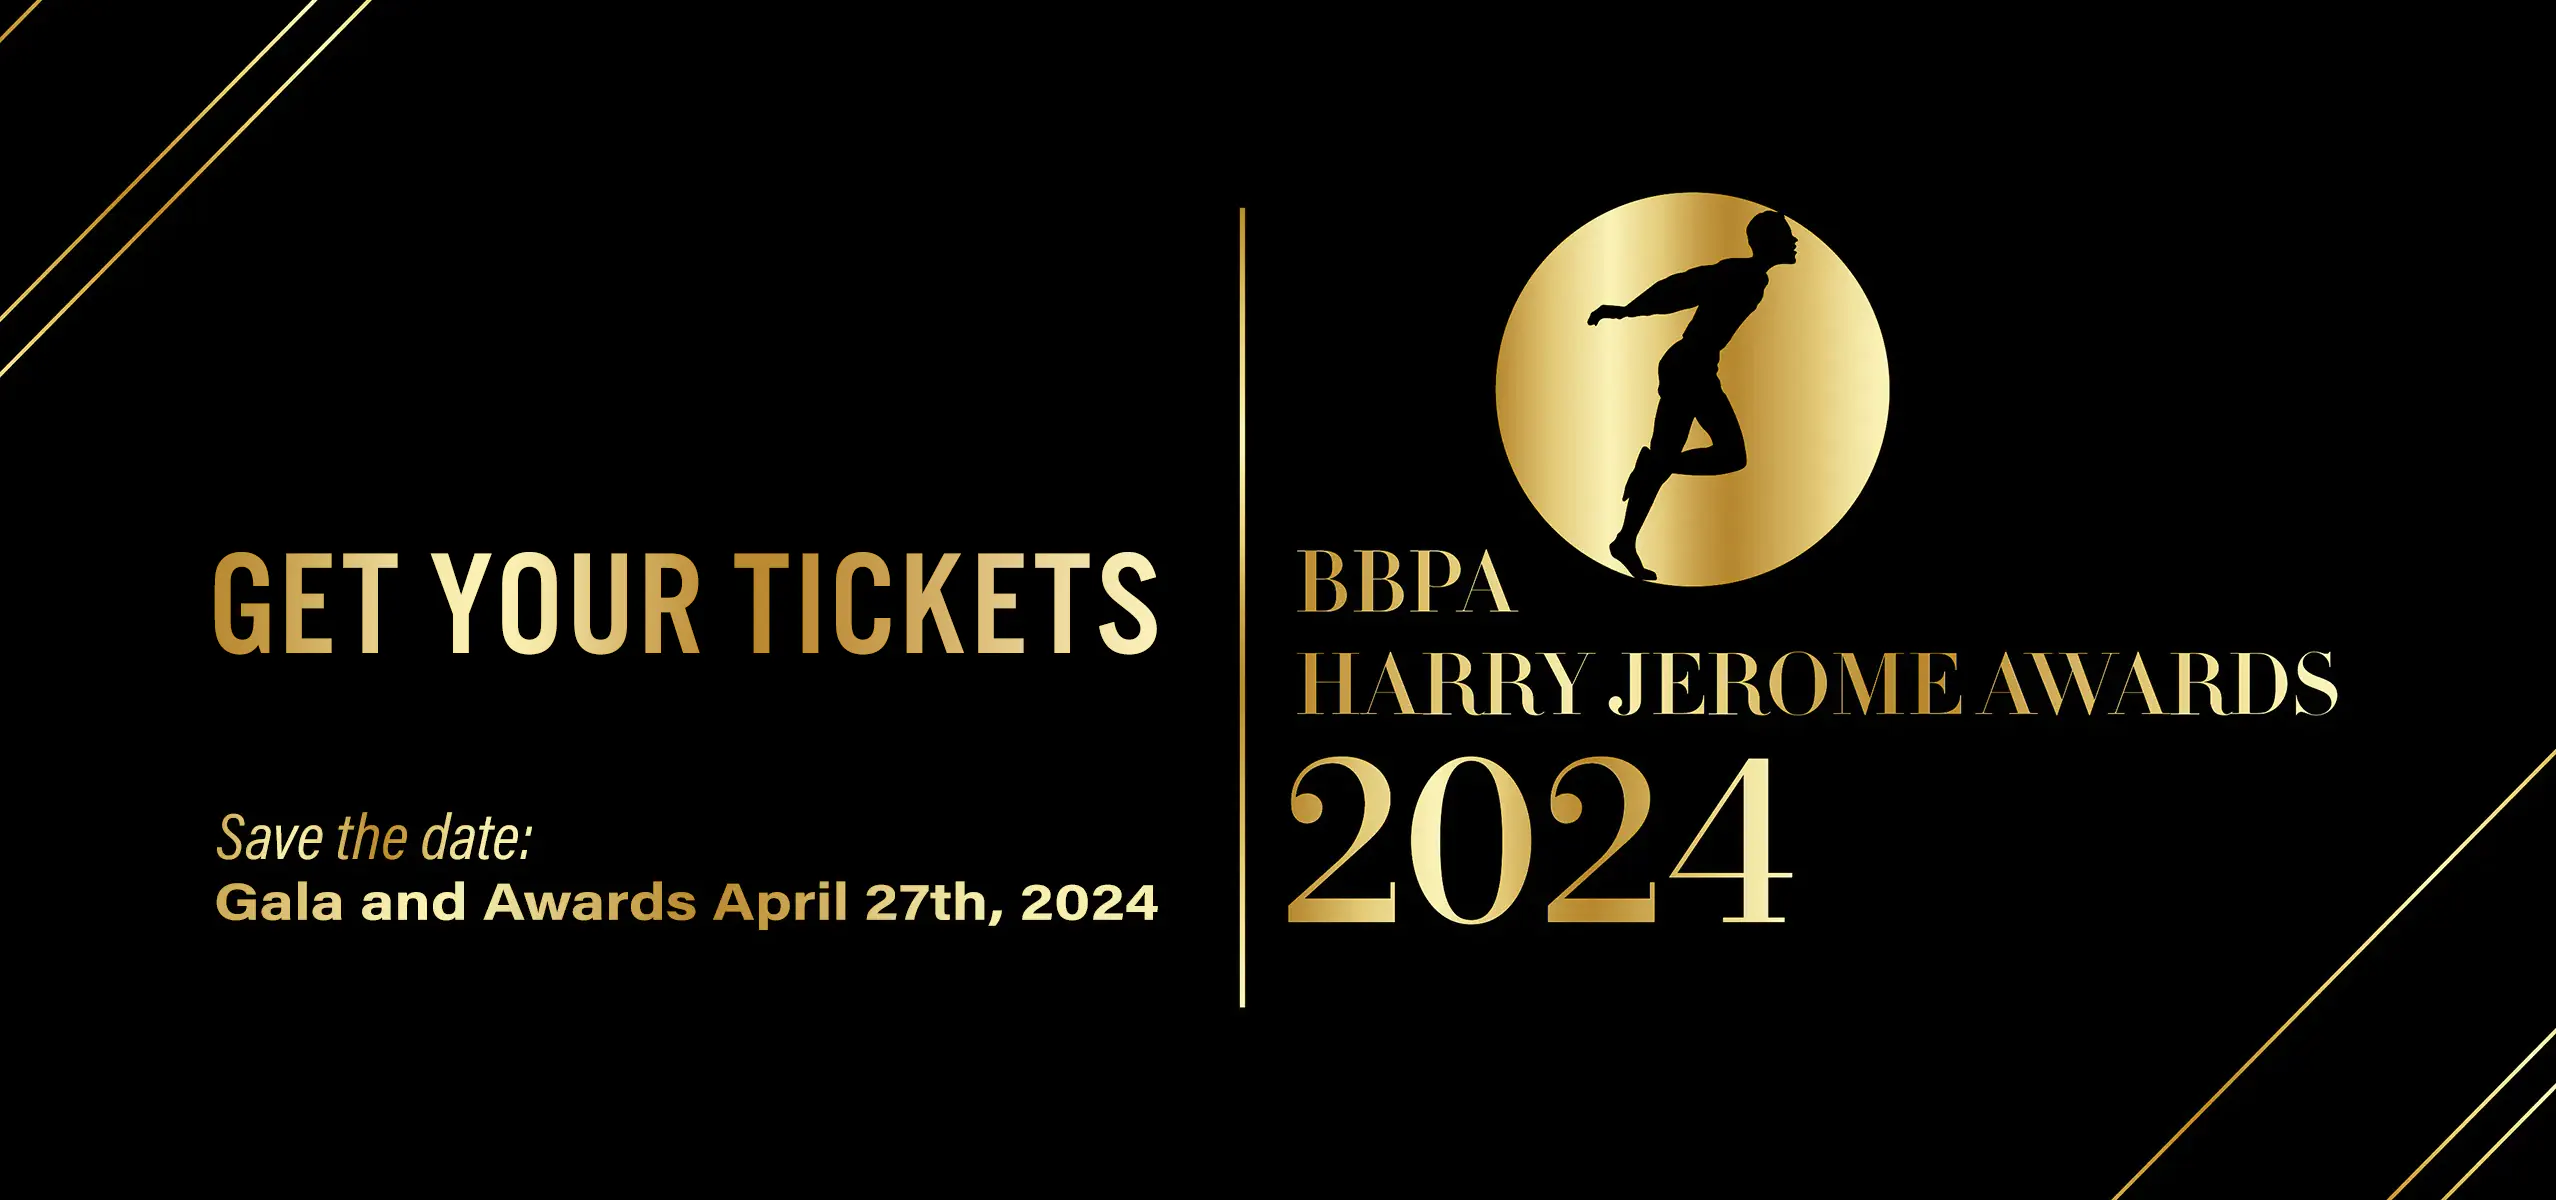 BBPA HJA 2024 Get Your Tickets